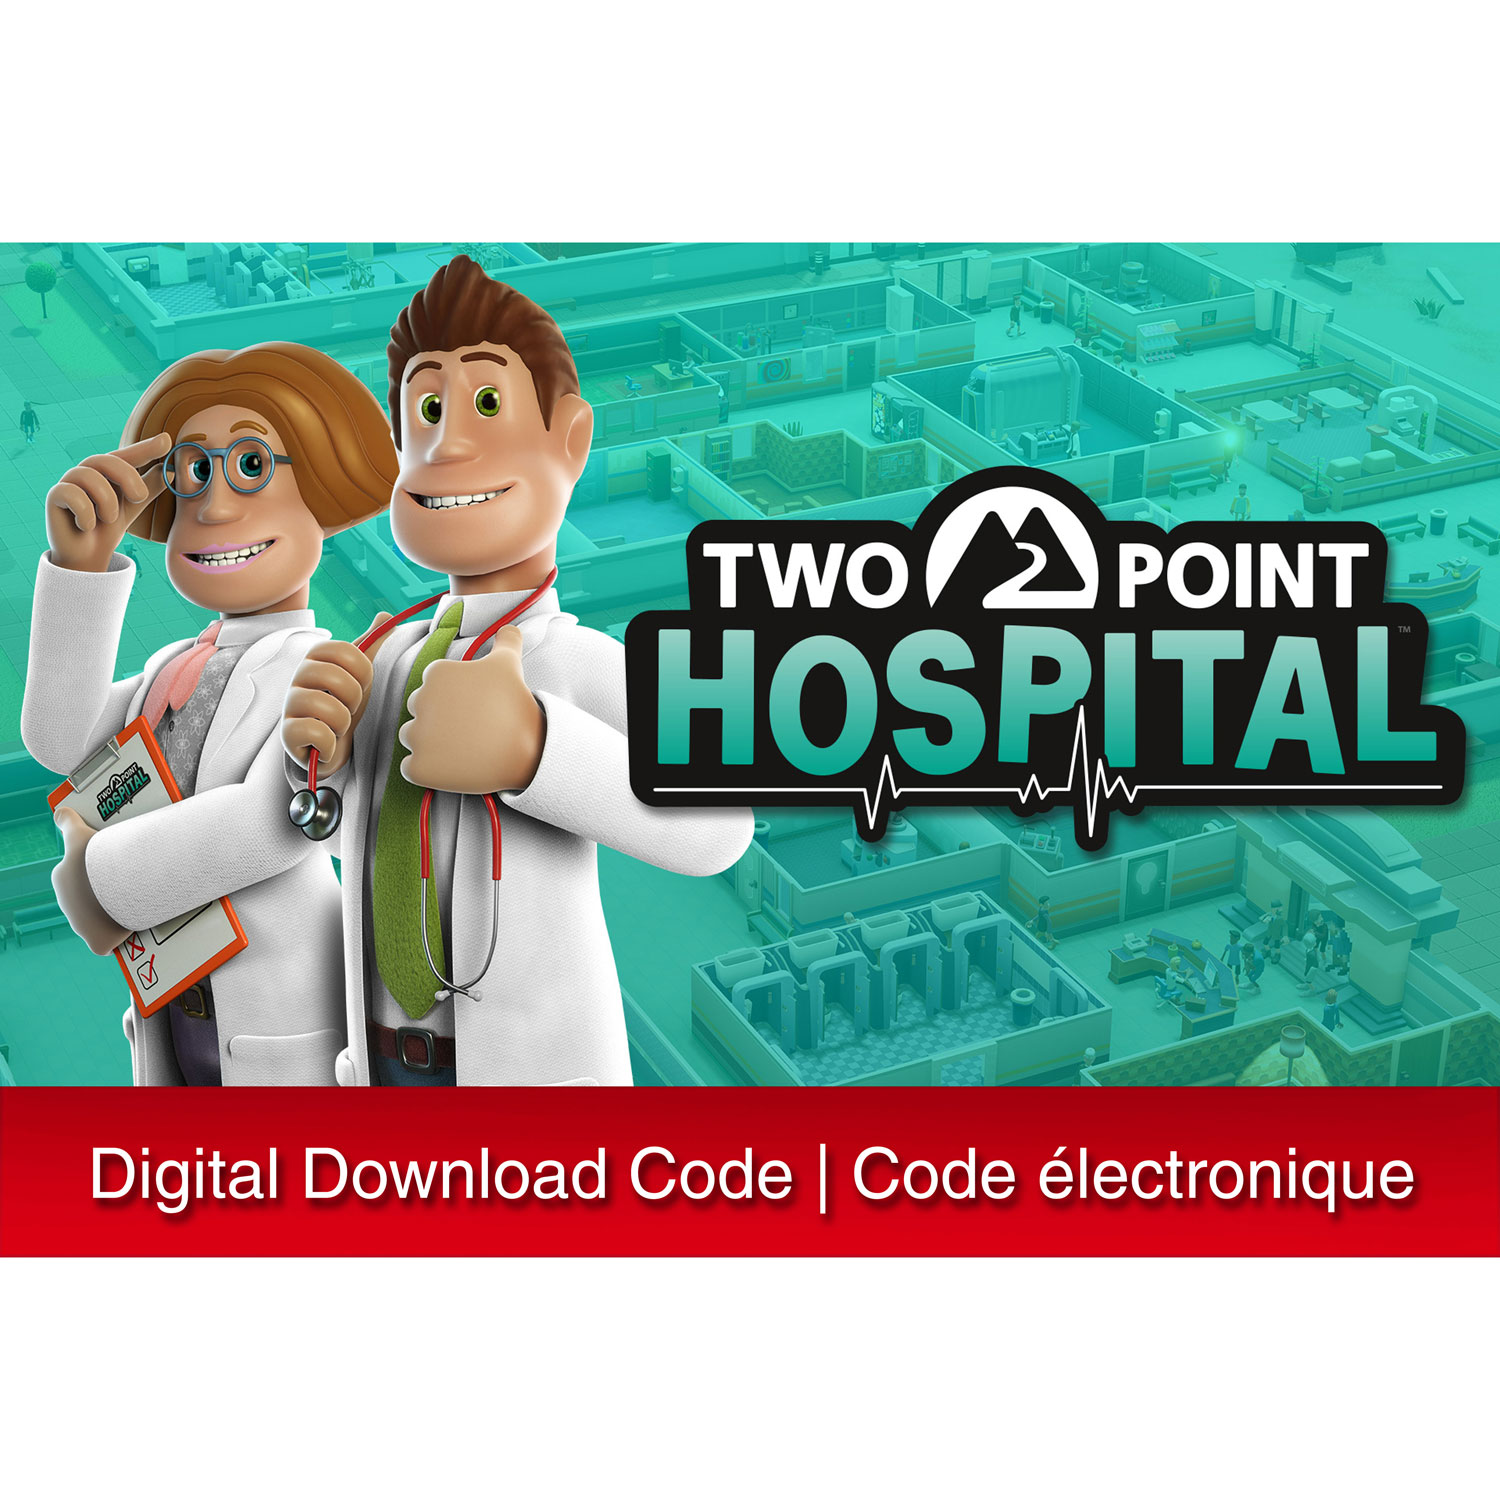 Two Point Hospital (Switch) - Digital Download